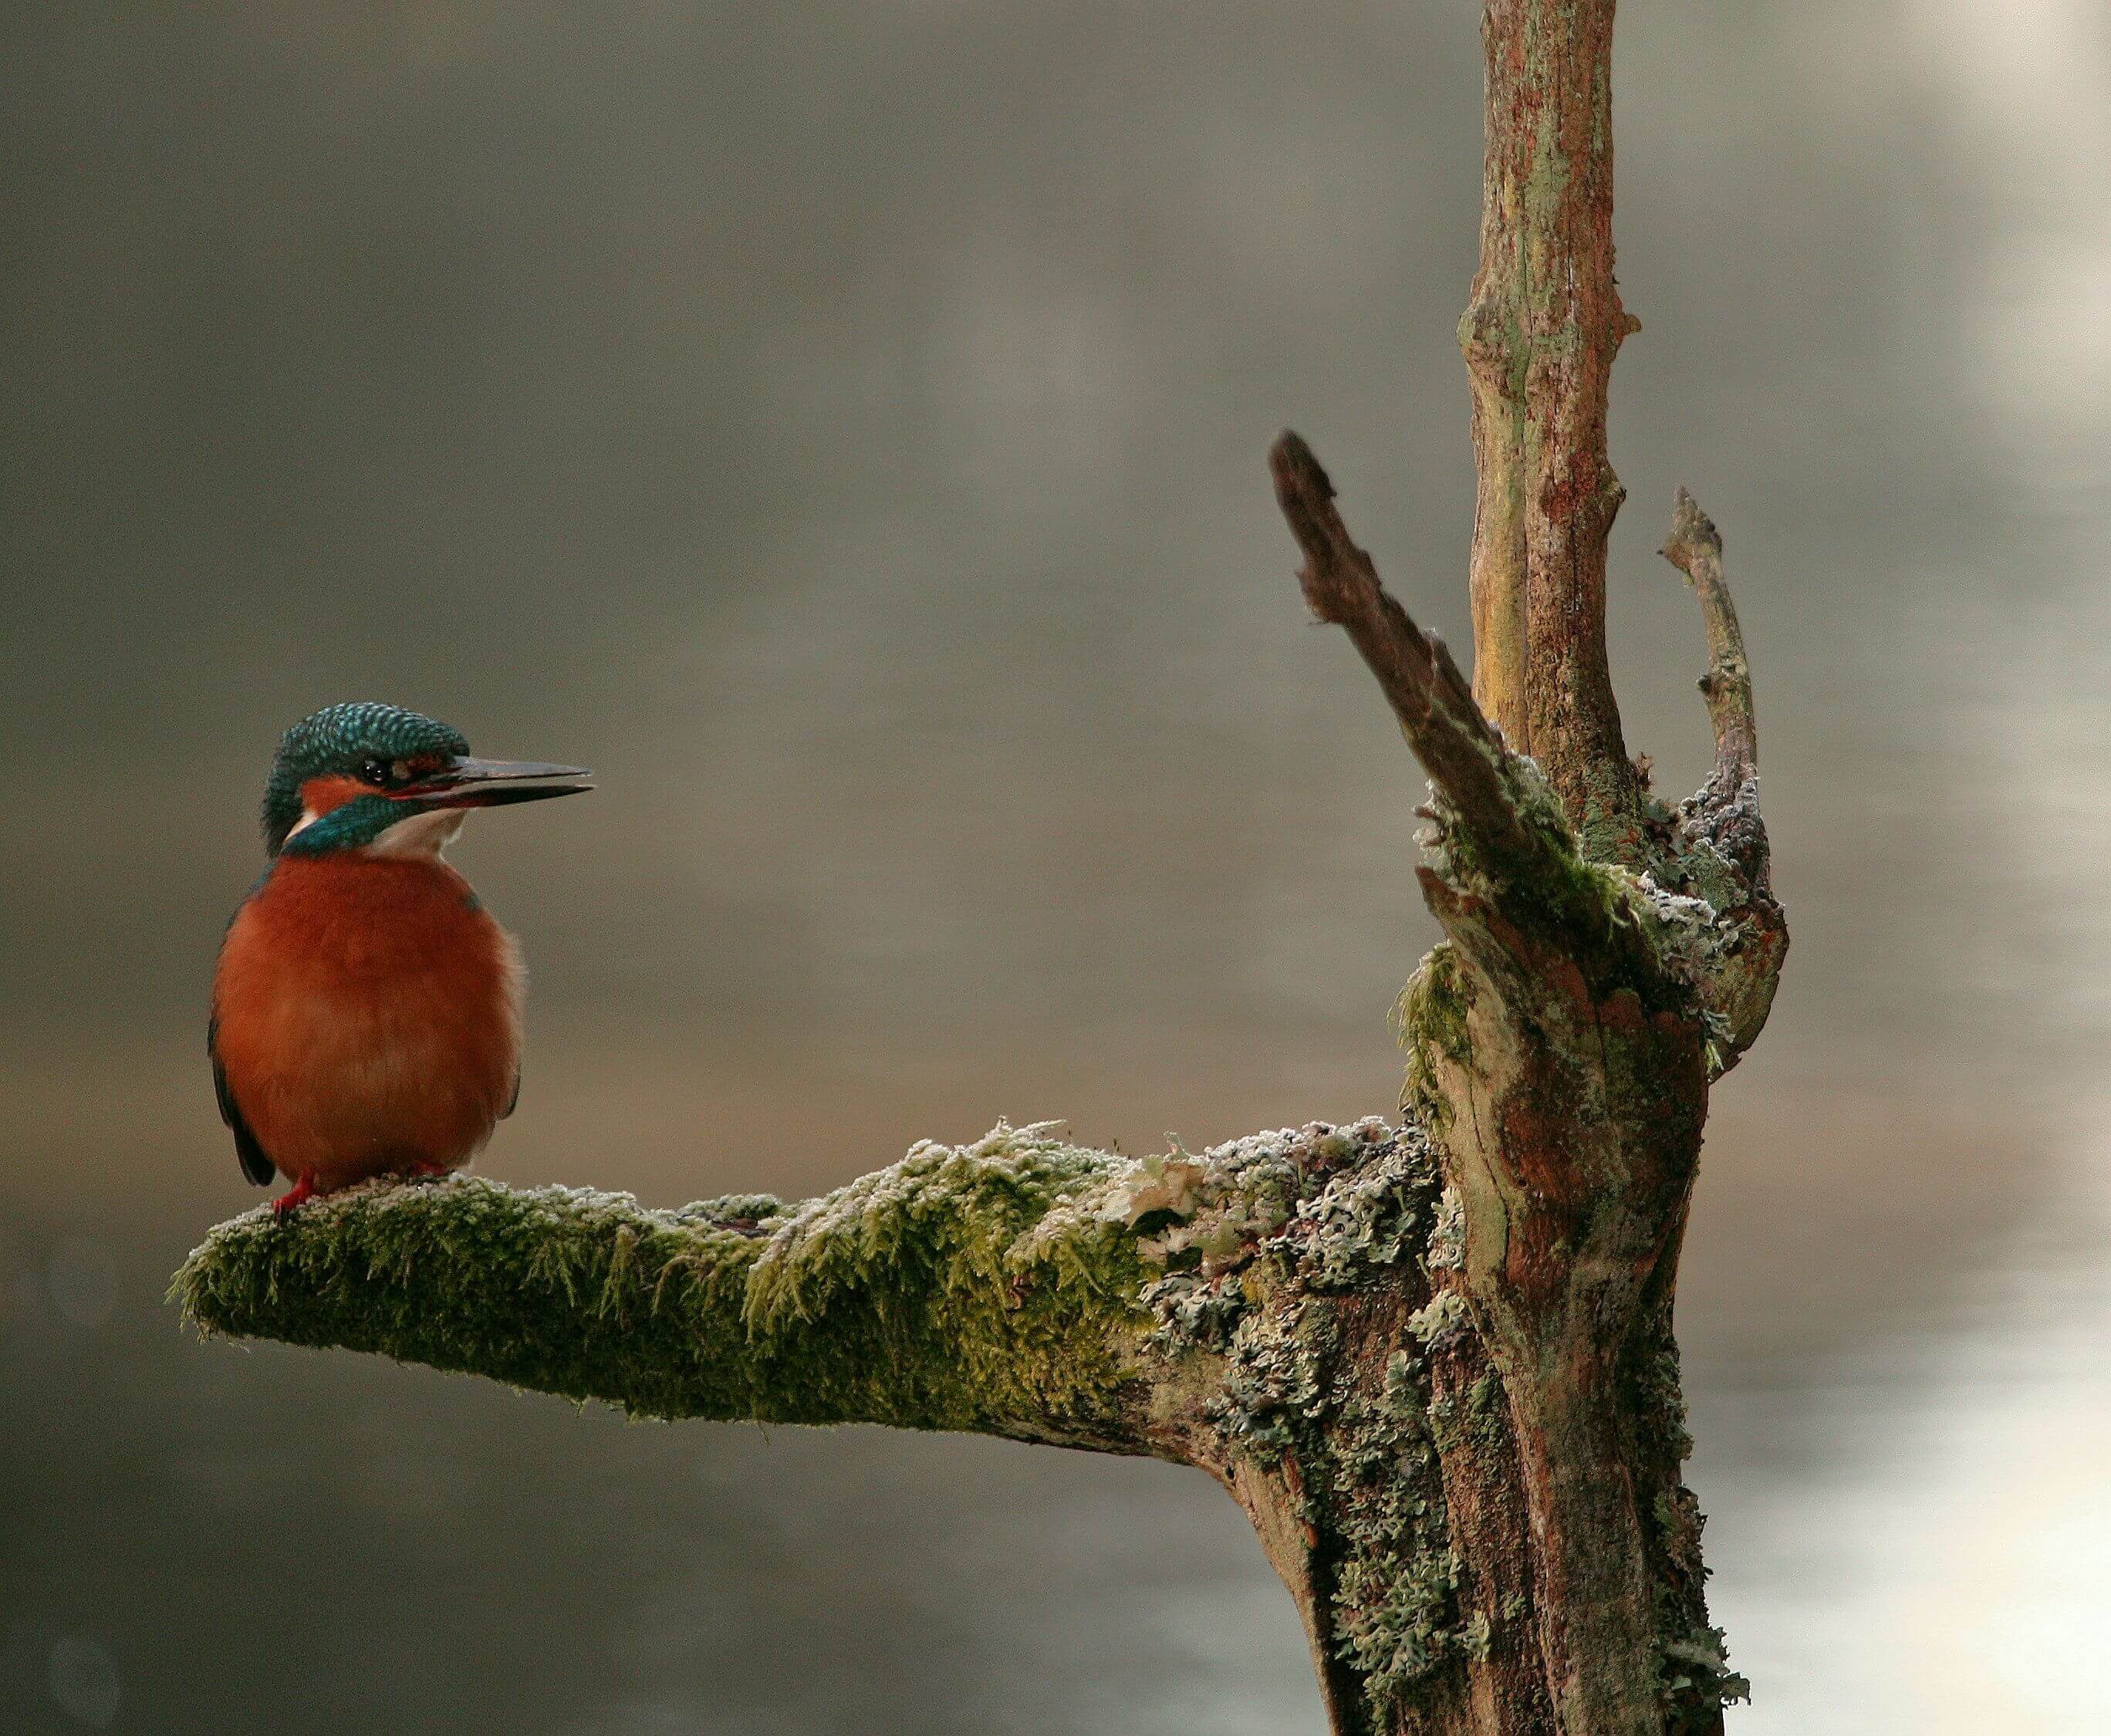 A kingfisher perches on a branch